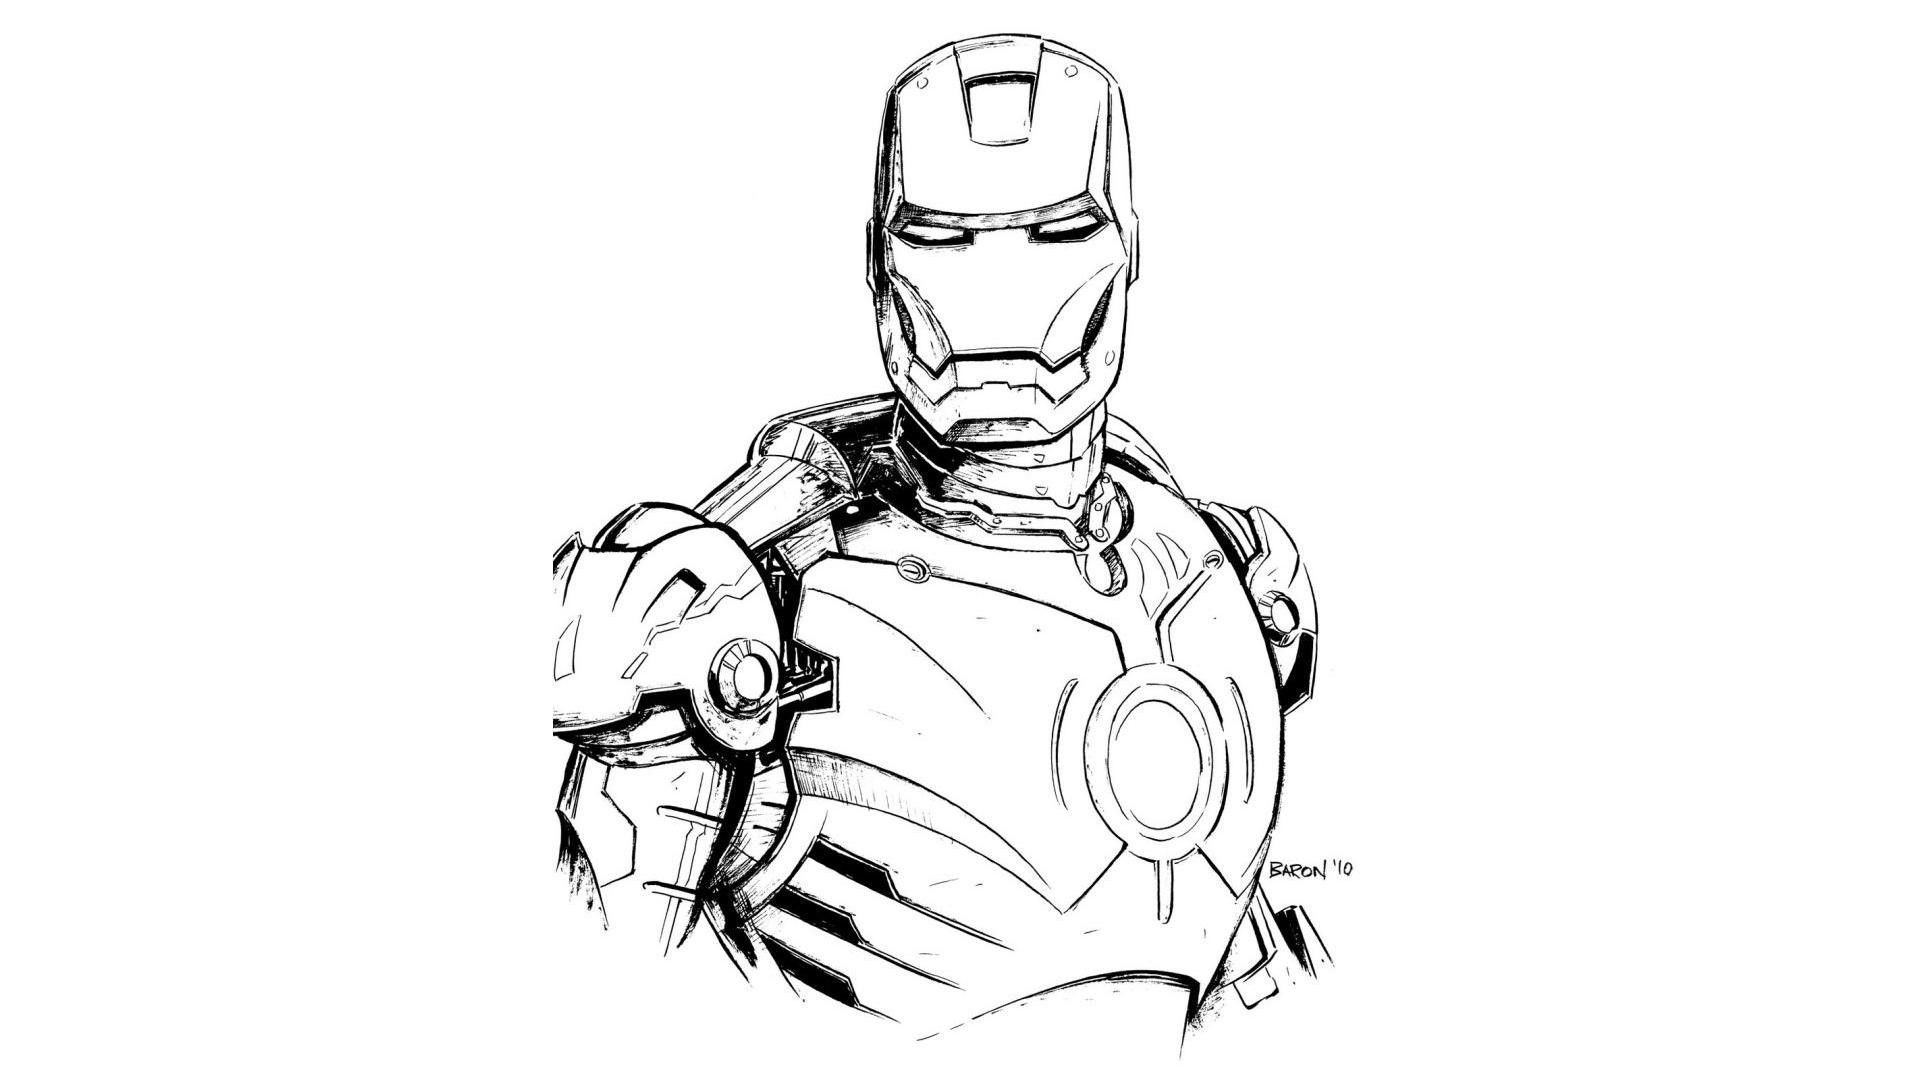 Ironman Sketch by NitroInjected on DeviantArt